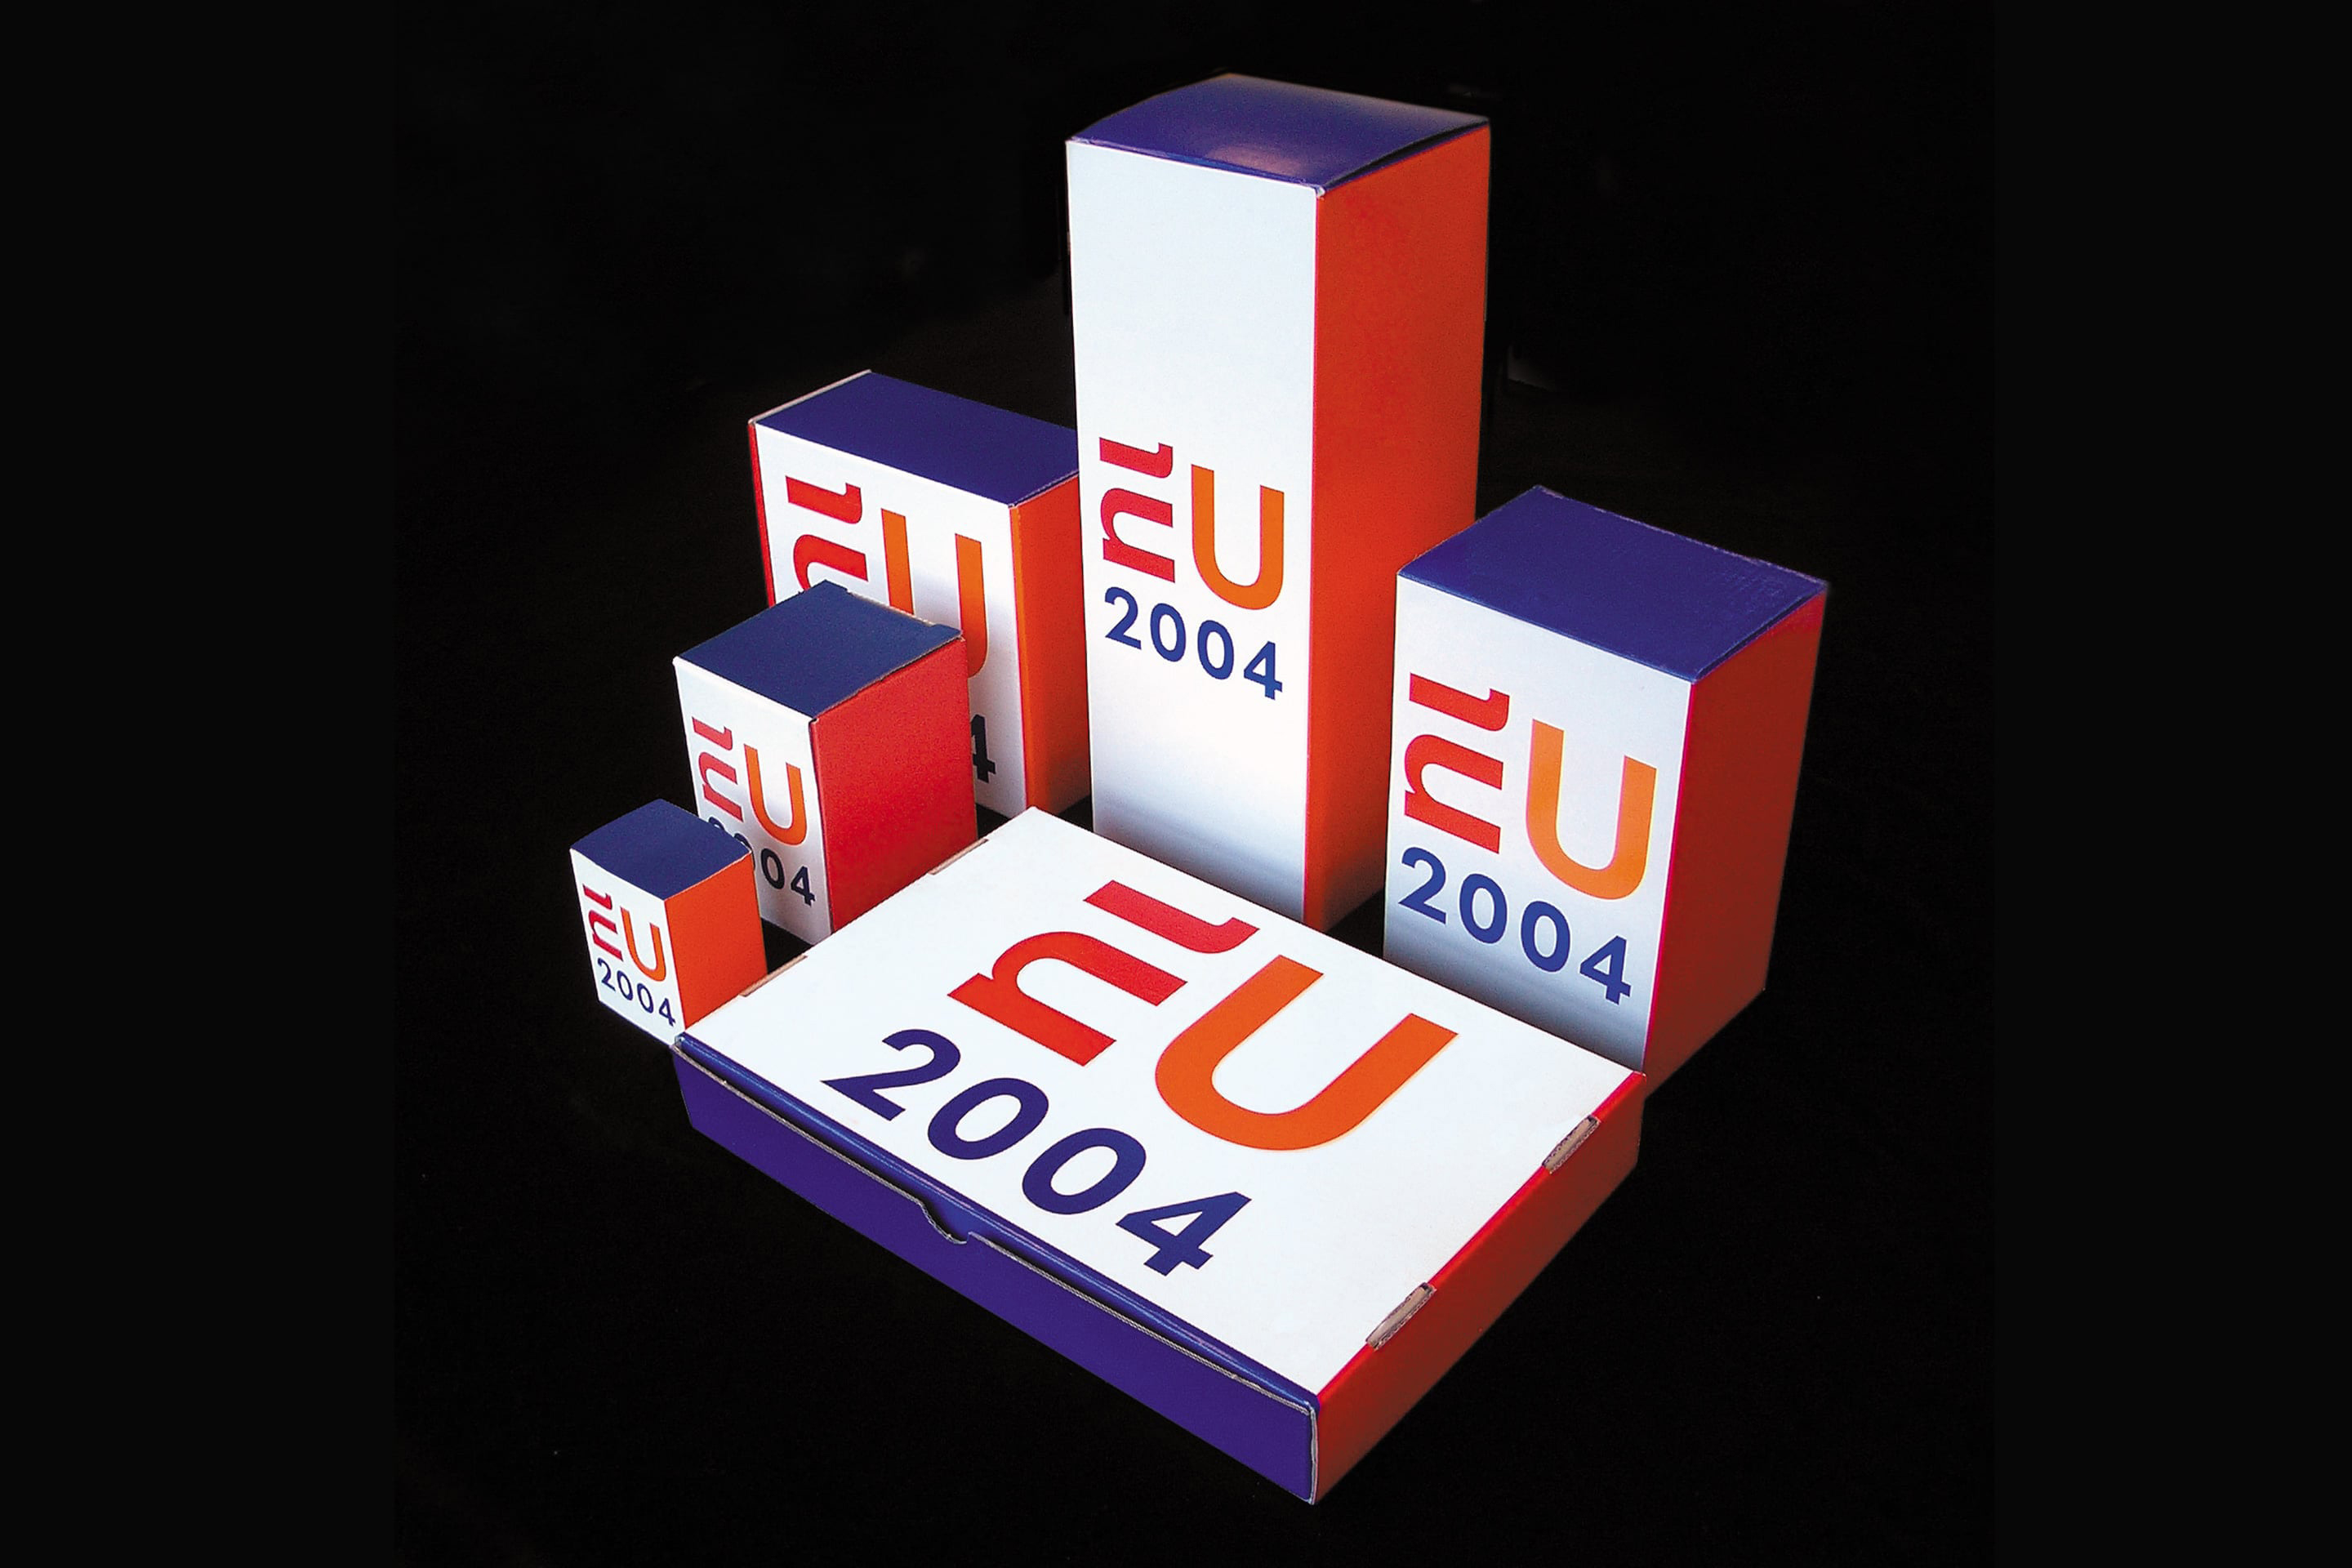 studio dumbar design visual brand identity for EUNL the European logo and event style for the Dutch Presidency of the European Union packaging design 2004